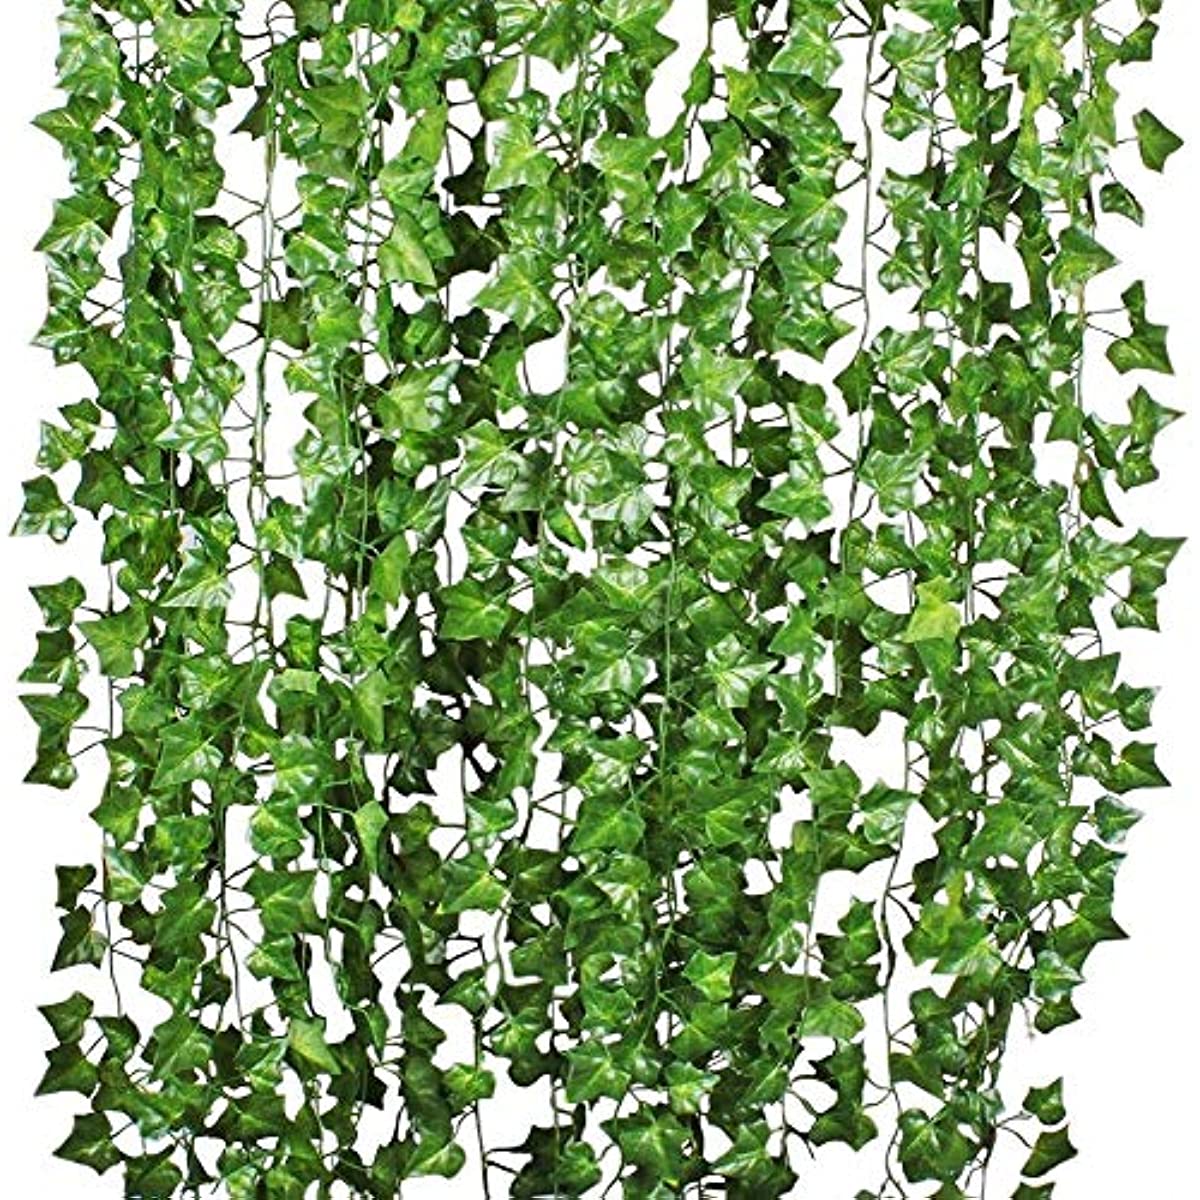 HO2NLE 12 Pack 84 Feet Artificial Fake Hanging Vines Plant Faux Silk Green  Leaf Garlands Home Office Garden Outdoor Wall Greenery Cover Jungle Party  Decoration